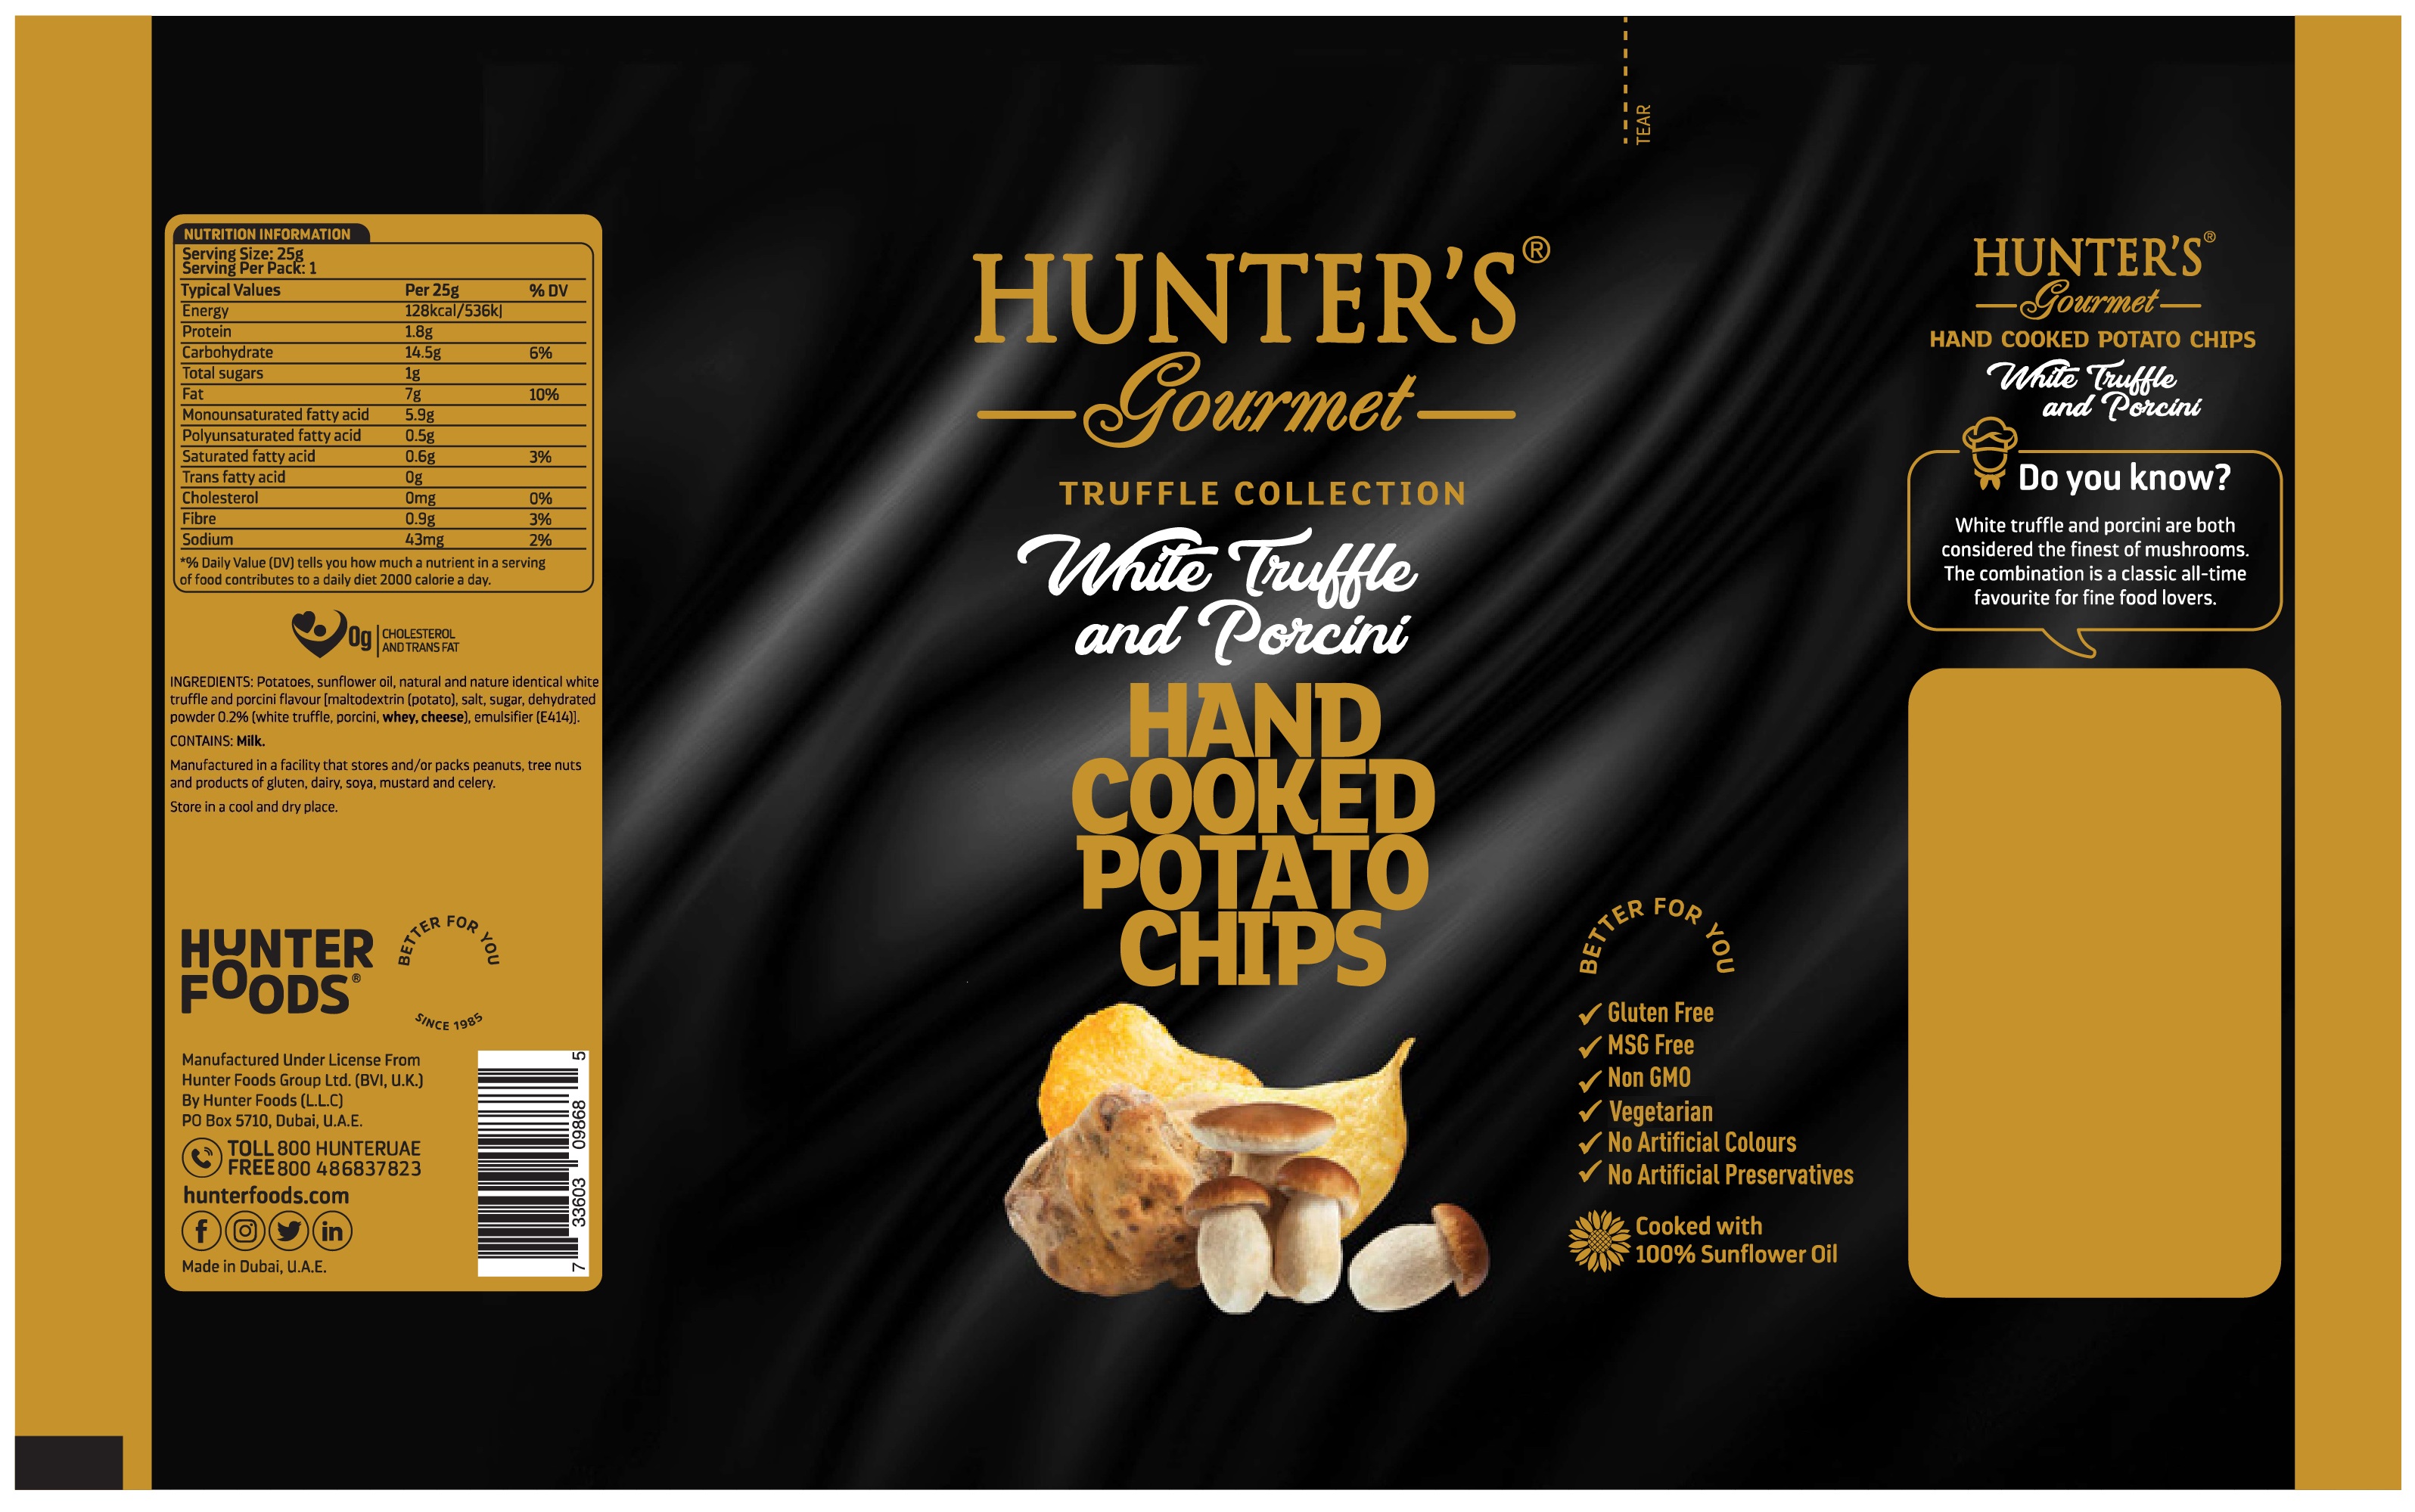 Hunter's Gourmet Hand Cooked Potato Chips White Truffle and Porcini 50 units per case 25 g Product Label